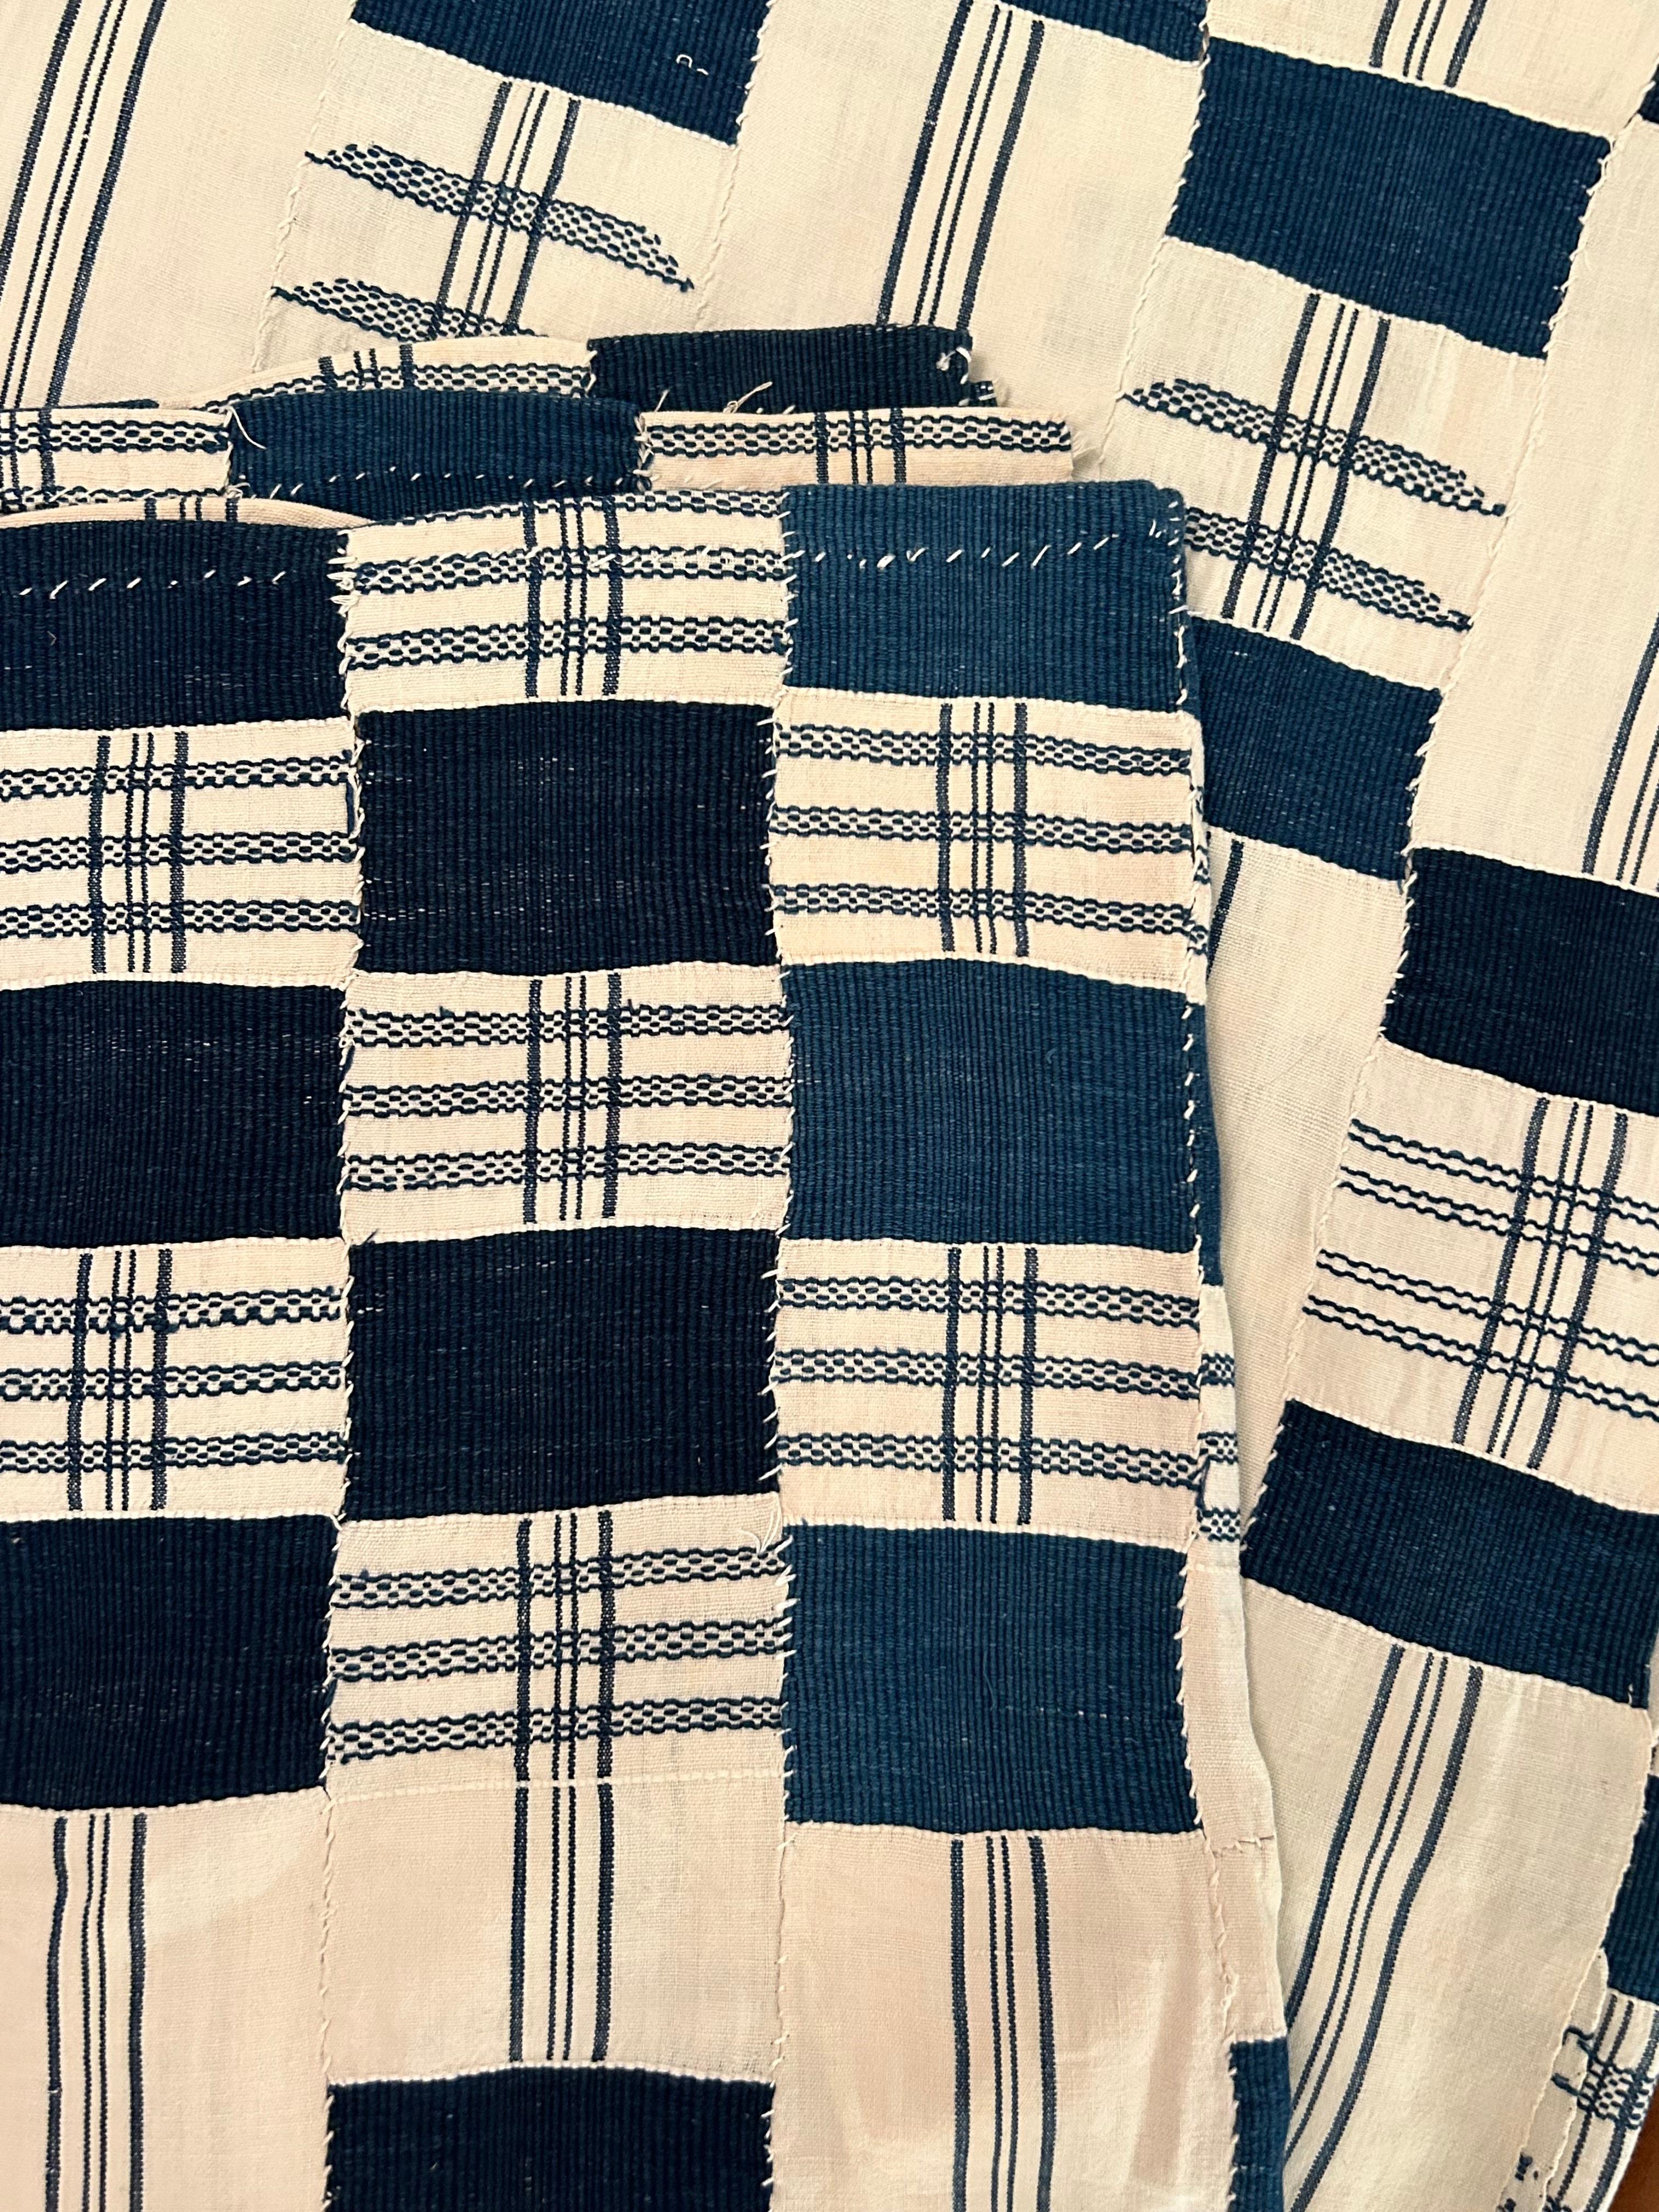 Mid-20th Century Vintage Asante Kente Textile in Blue and White, Ghana, 1930s